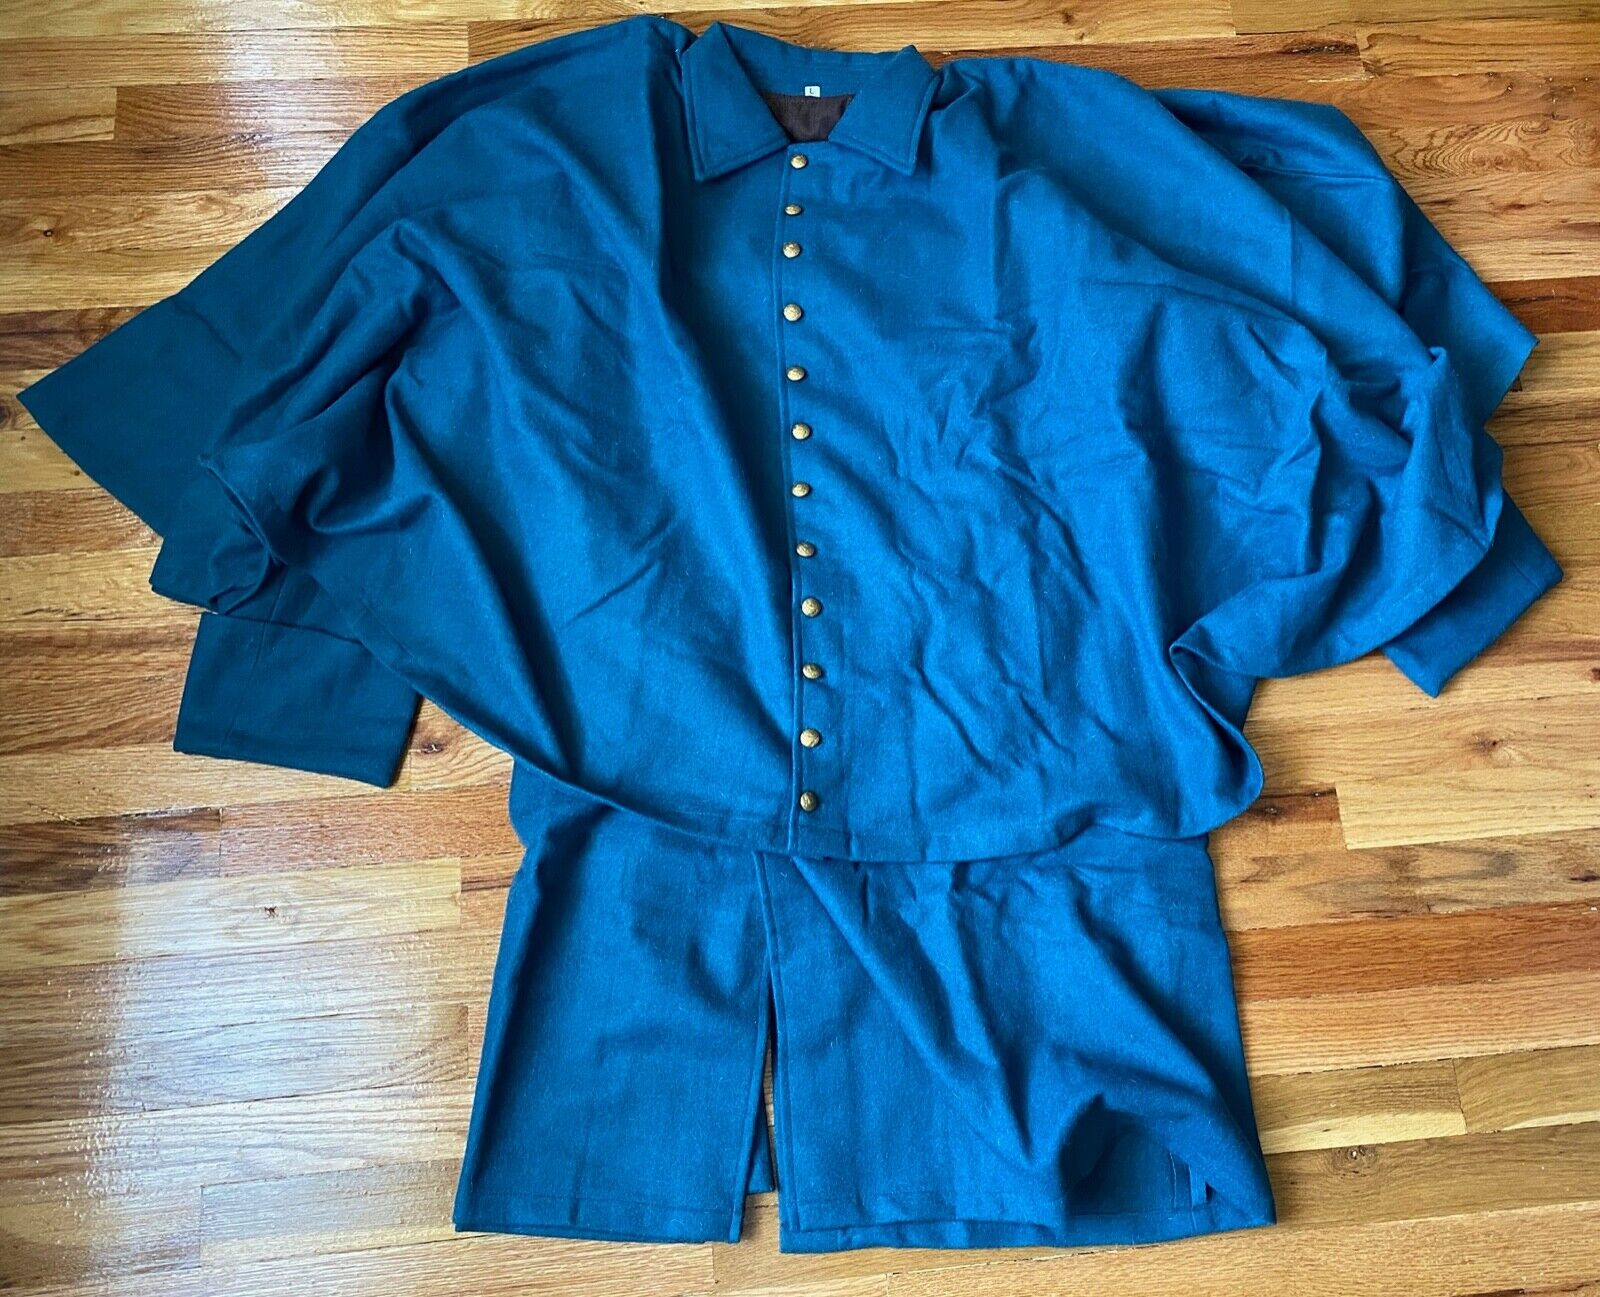 INDIAN WARS SPAN AM US ARMY M1872 ENLISTED GREATCOAT OVERCOAT- SIZE 4 (46-50R)